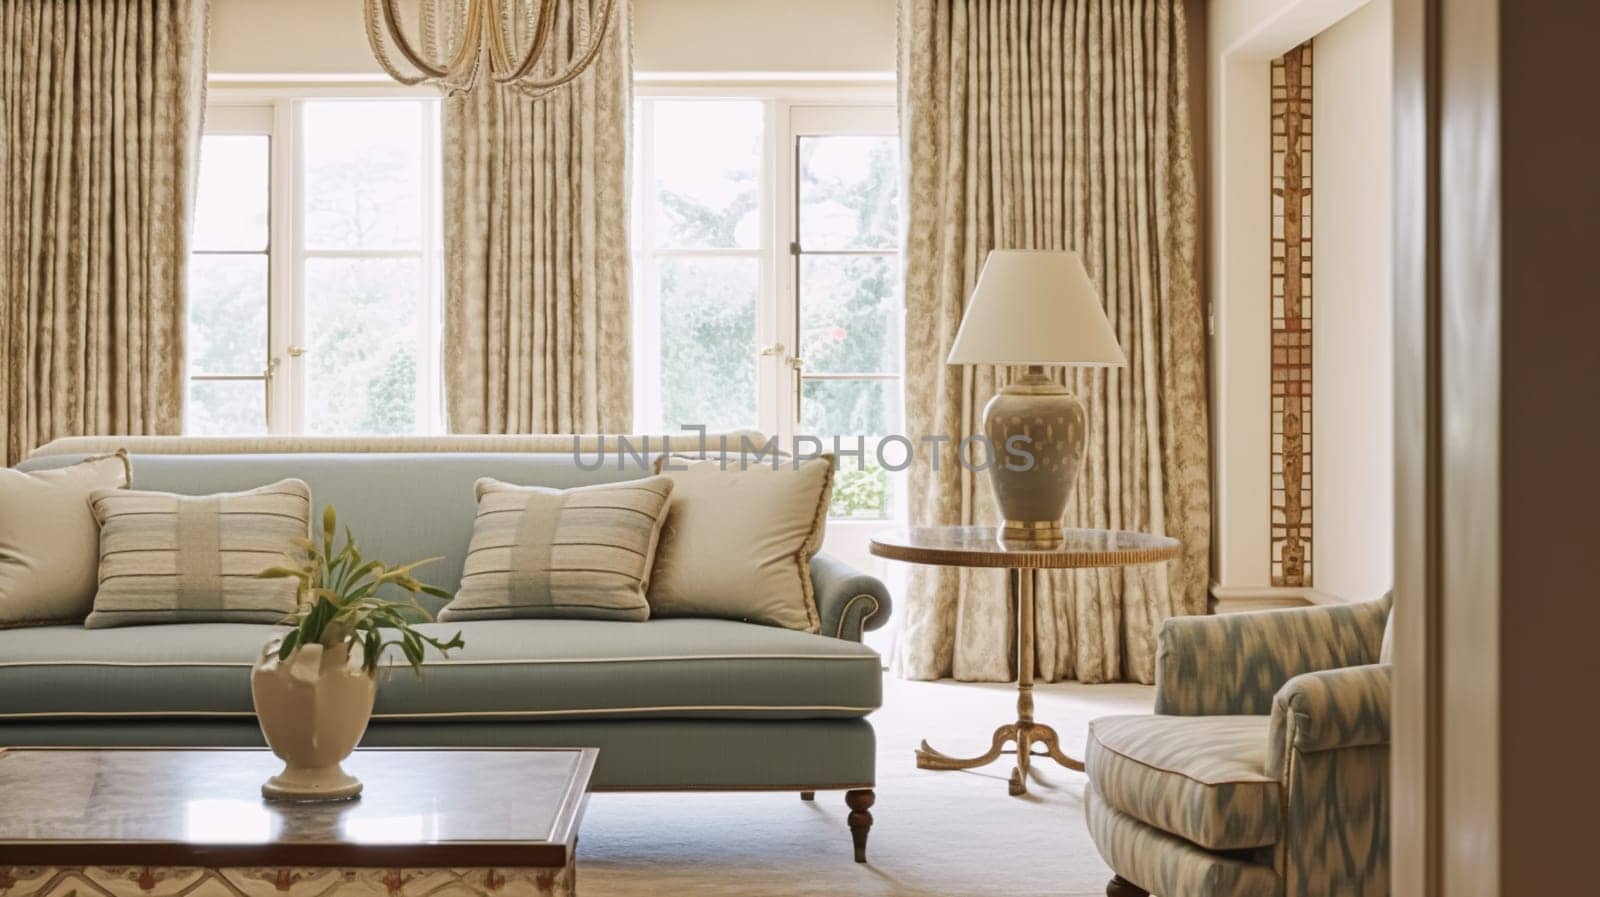 Manor sitting room, living room interior design and country house home decor, sofa and lounge furniture, English countryside cottage style interiors